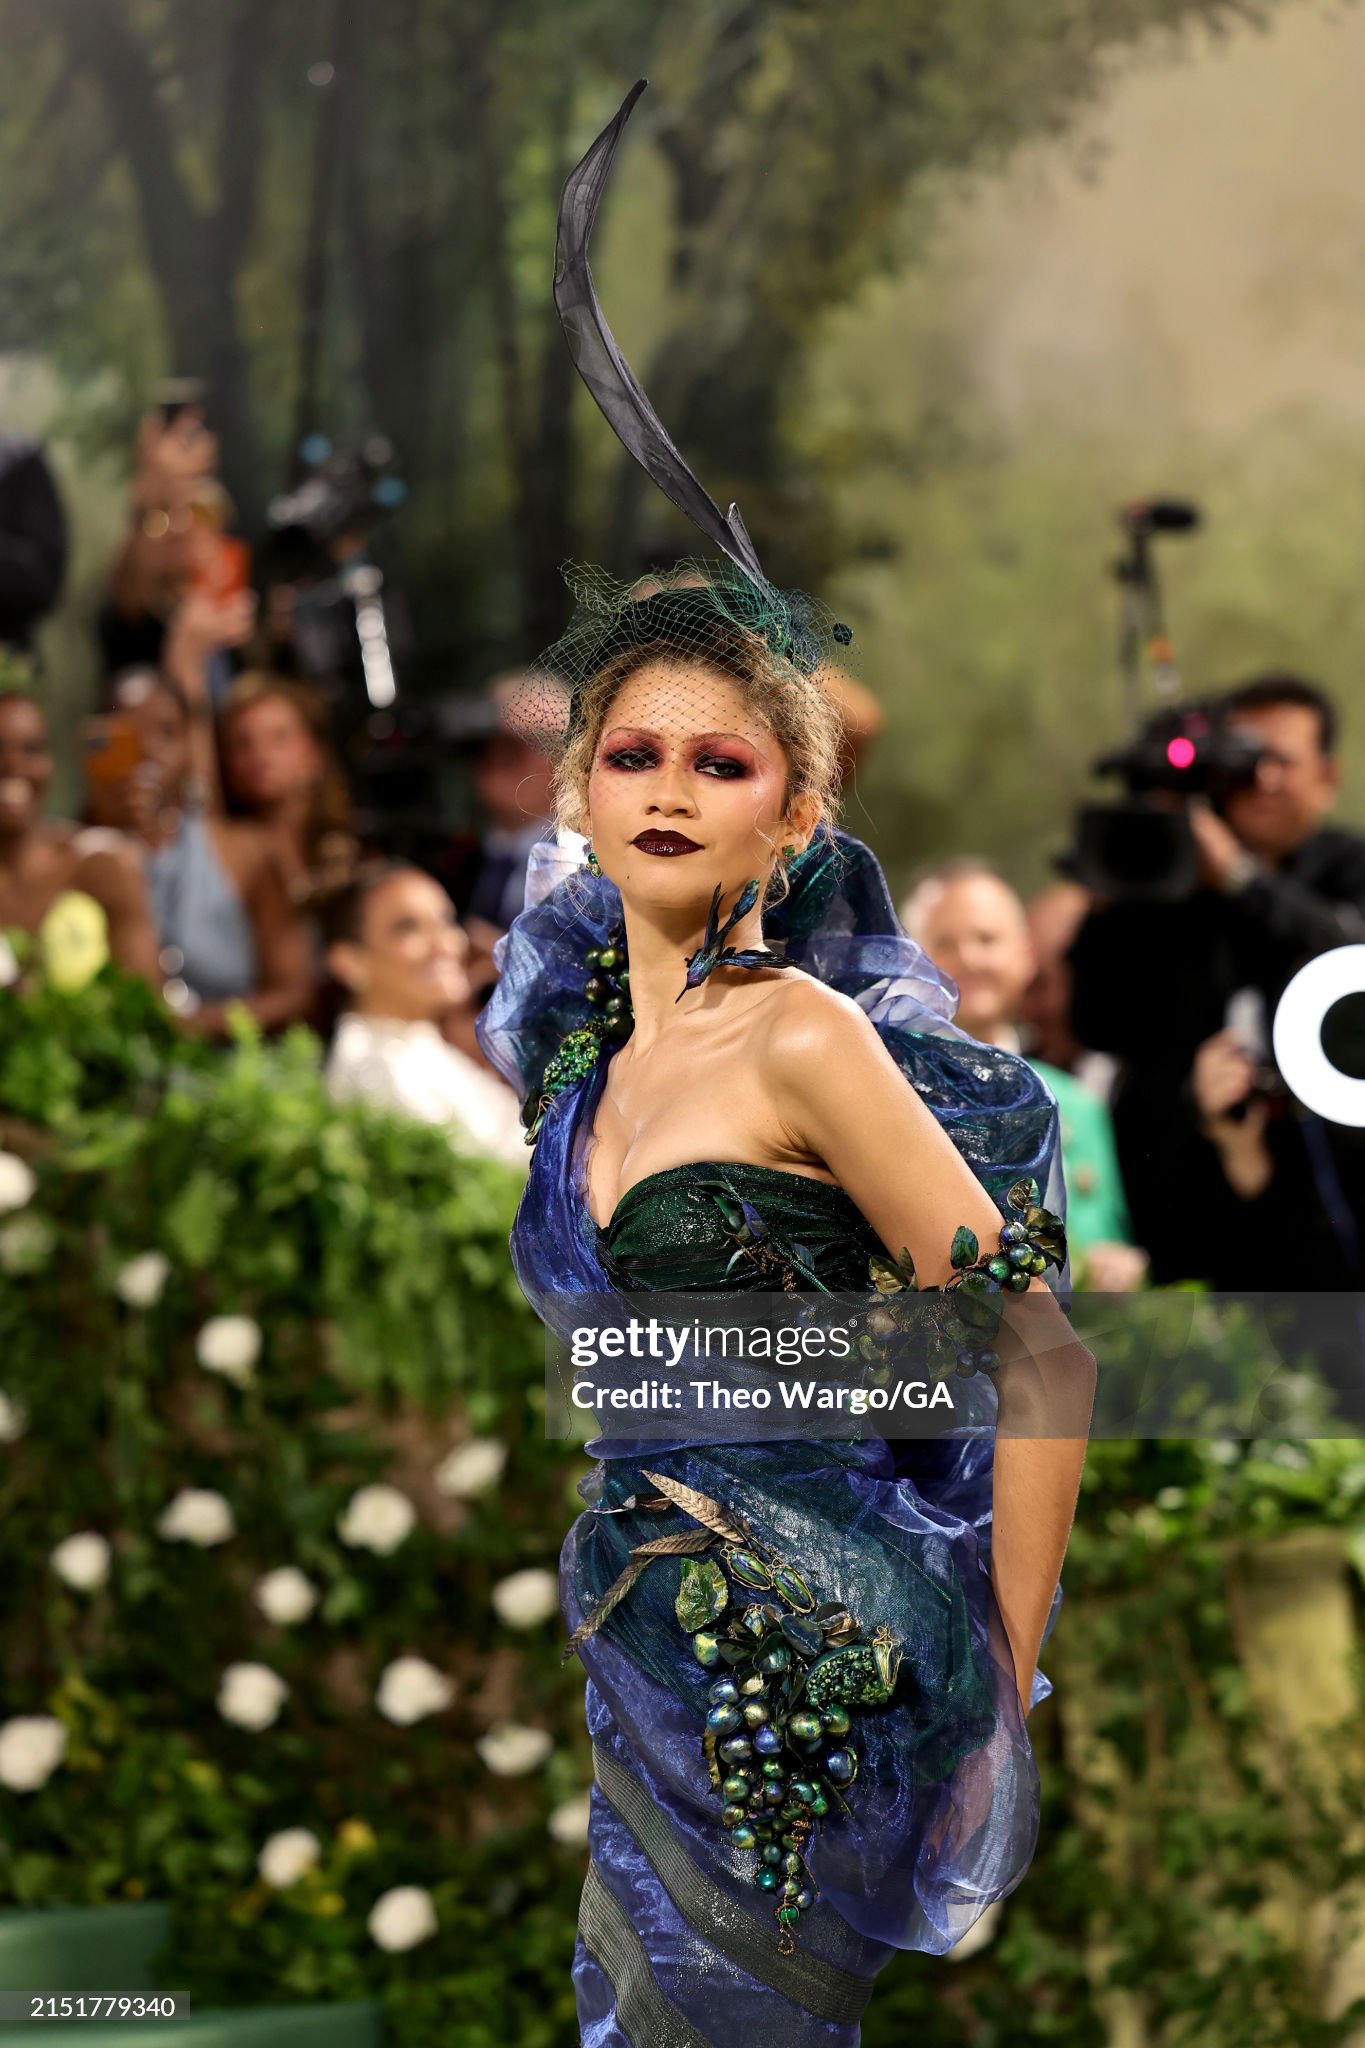 gettyimages-2151779340-2048x2048.jpg